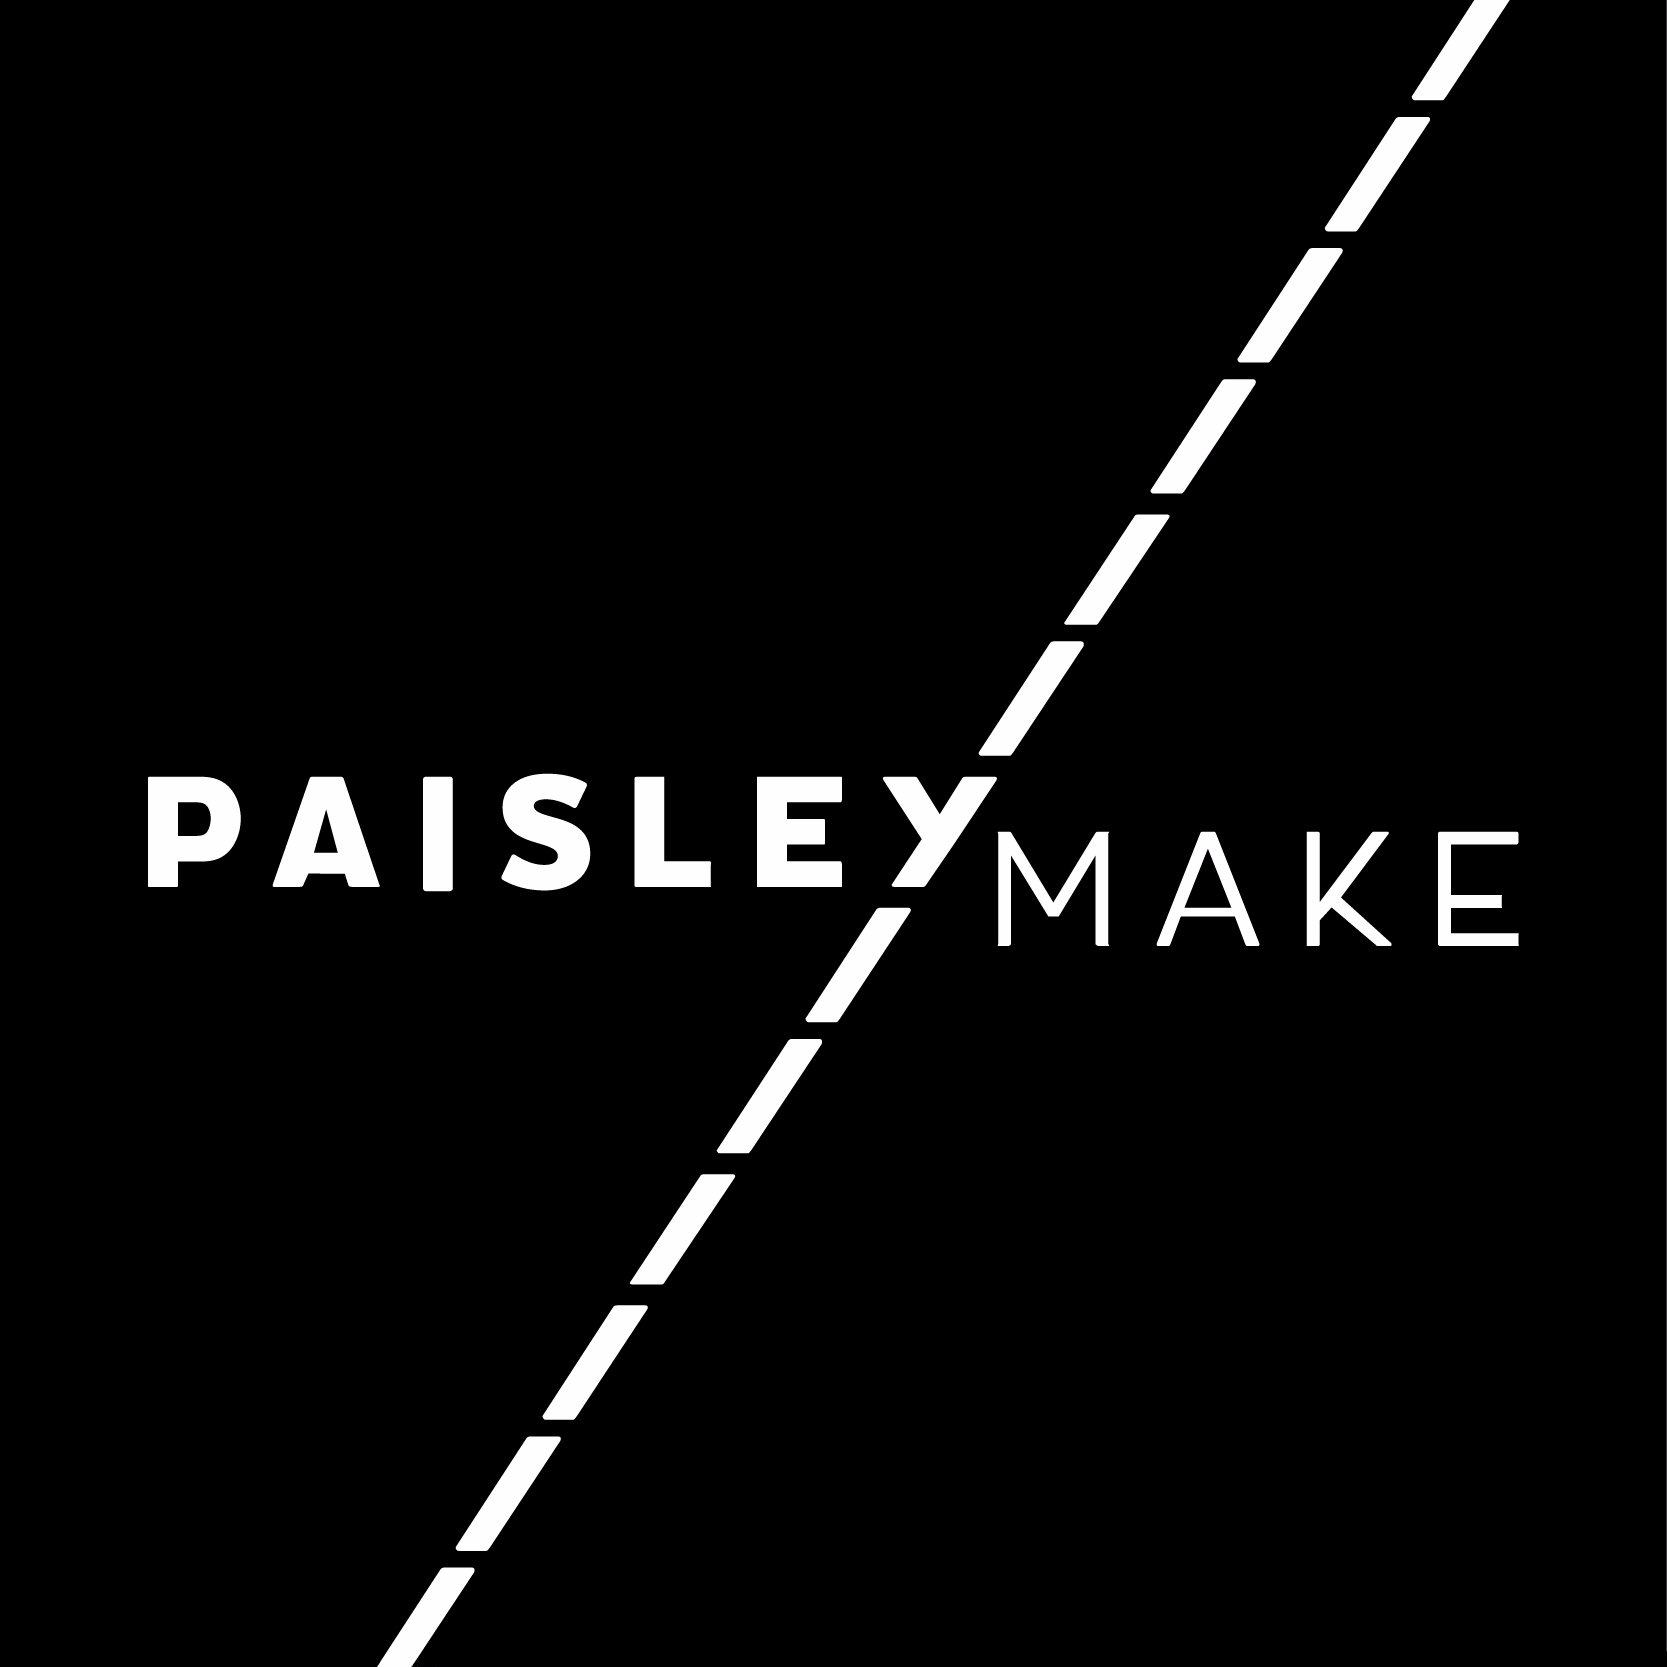 Celebrating Paisley's remarkable pattern & textile collections, rekindling a community to inspire new designs, ideas, skills & quality craftsmanship